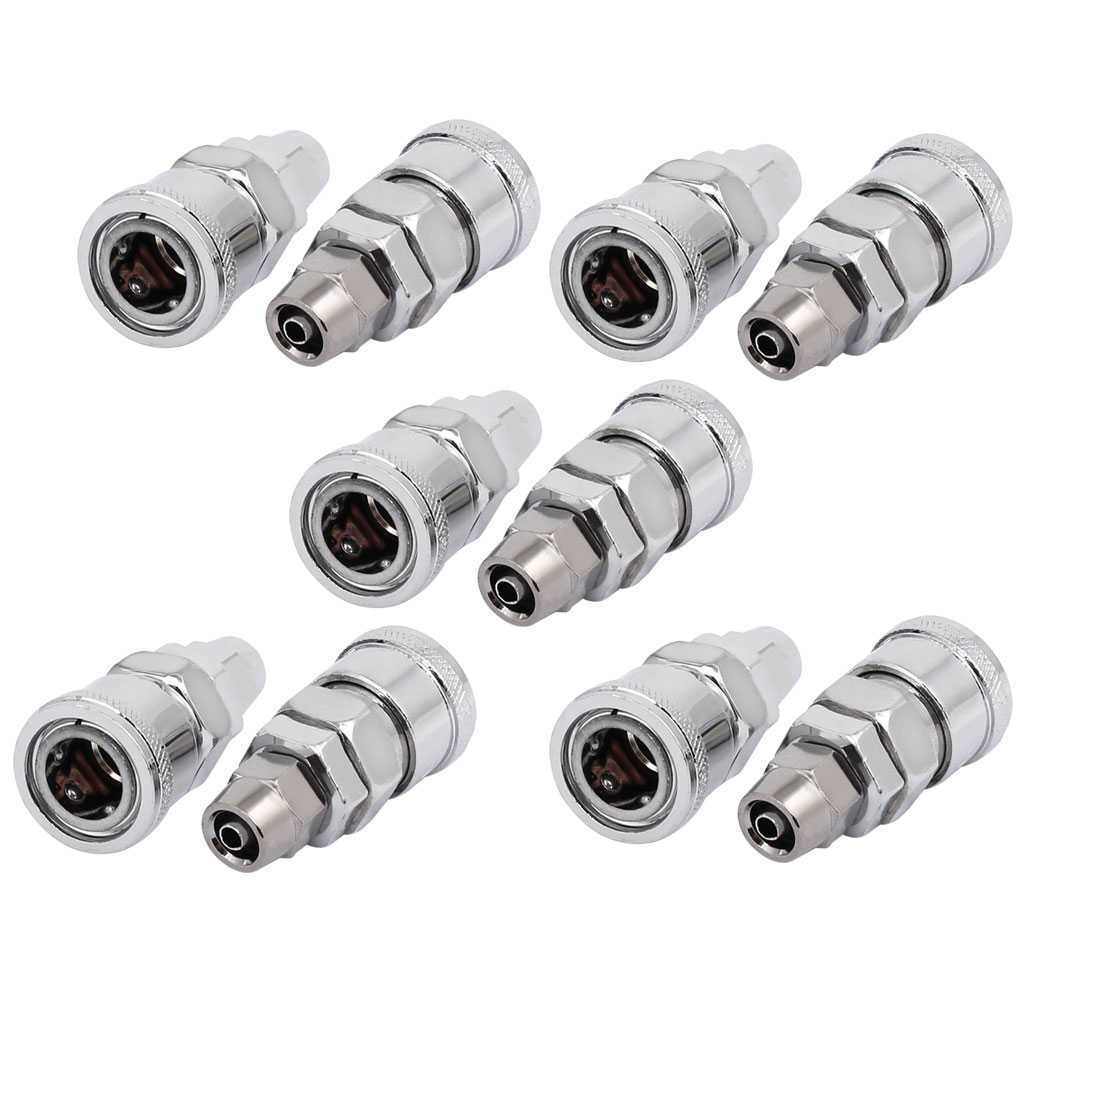 SP-20 Air Compressor Zinc Plated Quick Coupler 10PCS for 8mm Pipe Outter Dia